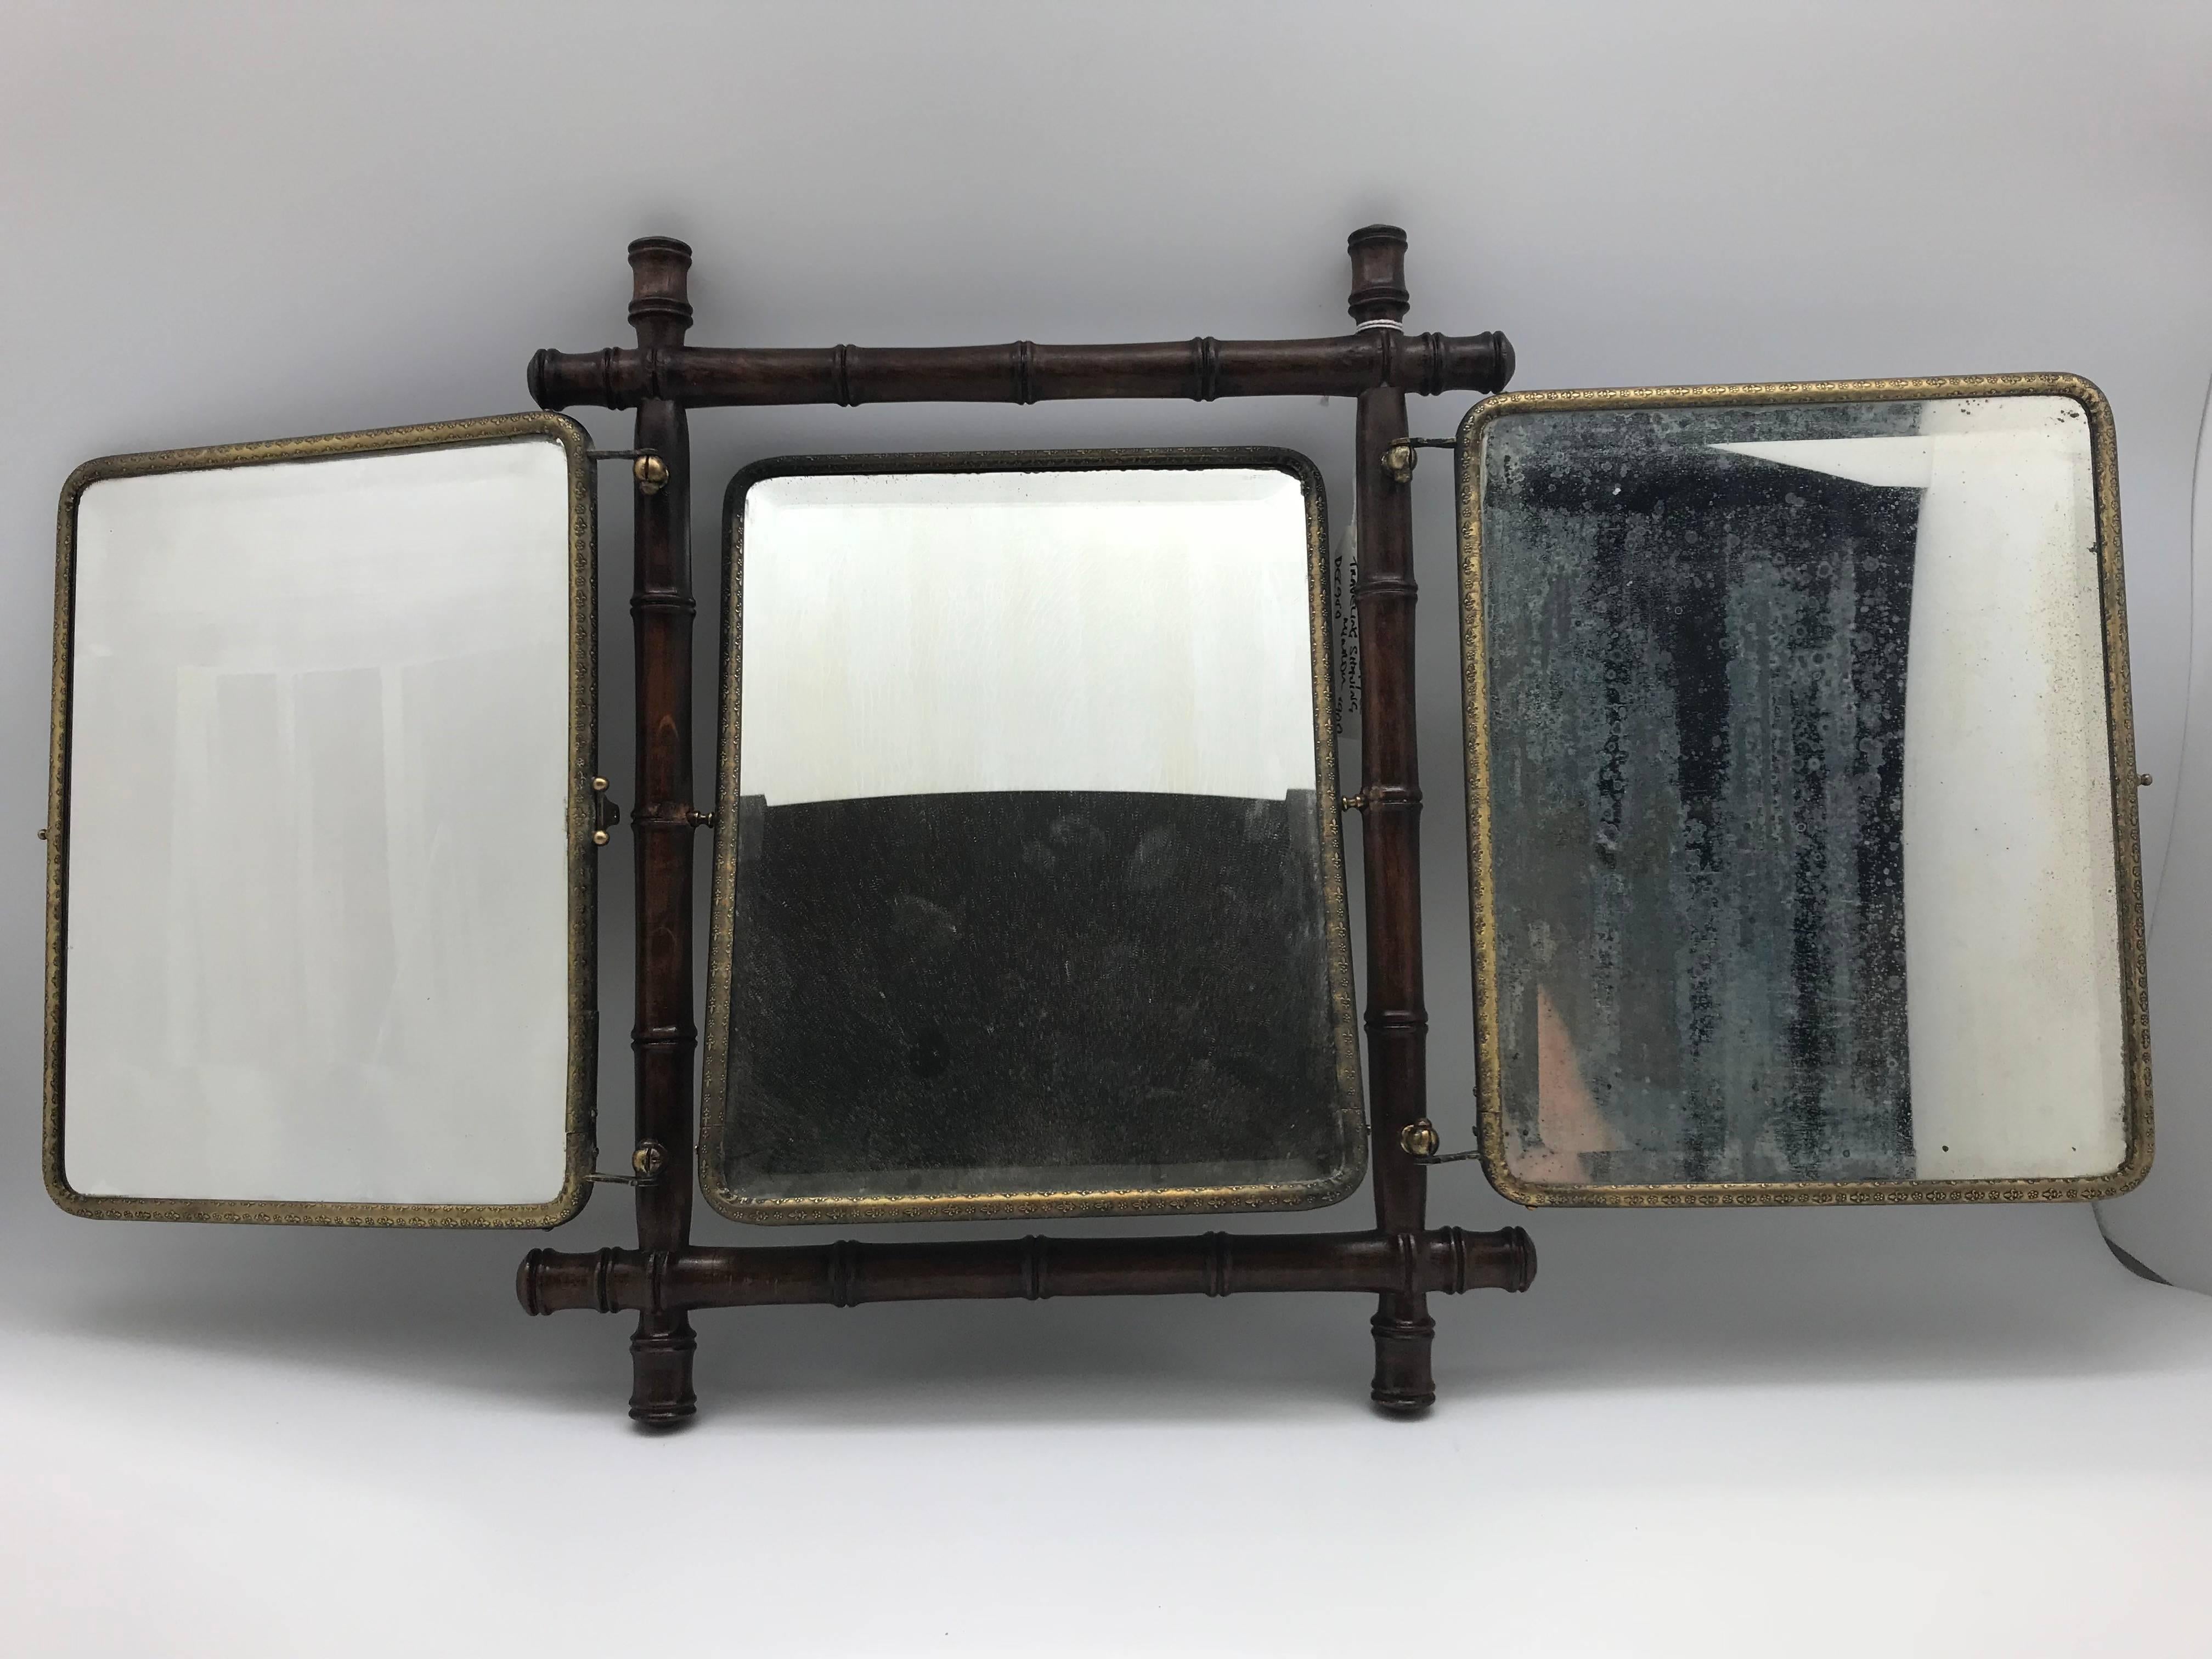 Metal Triptych Folding Traveling Shaving Mirror, Late 19th-Early 20th Century